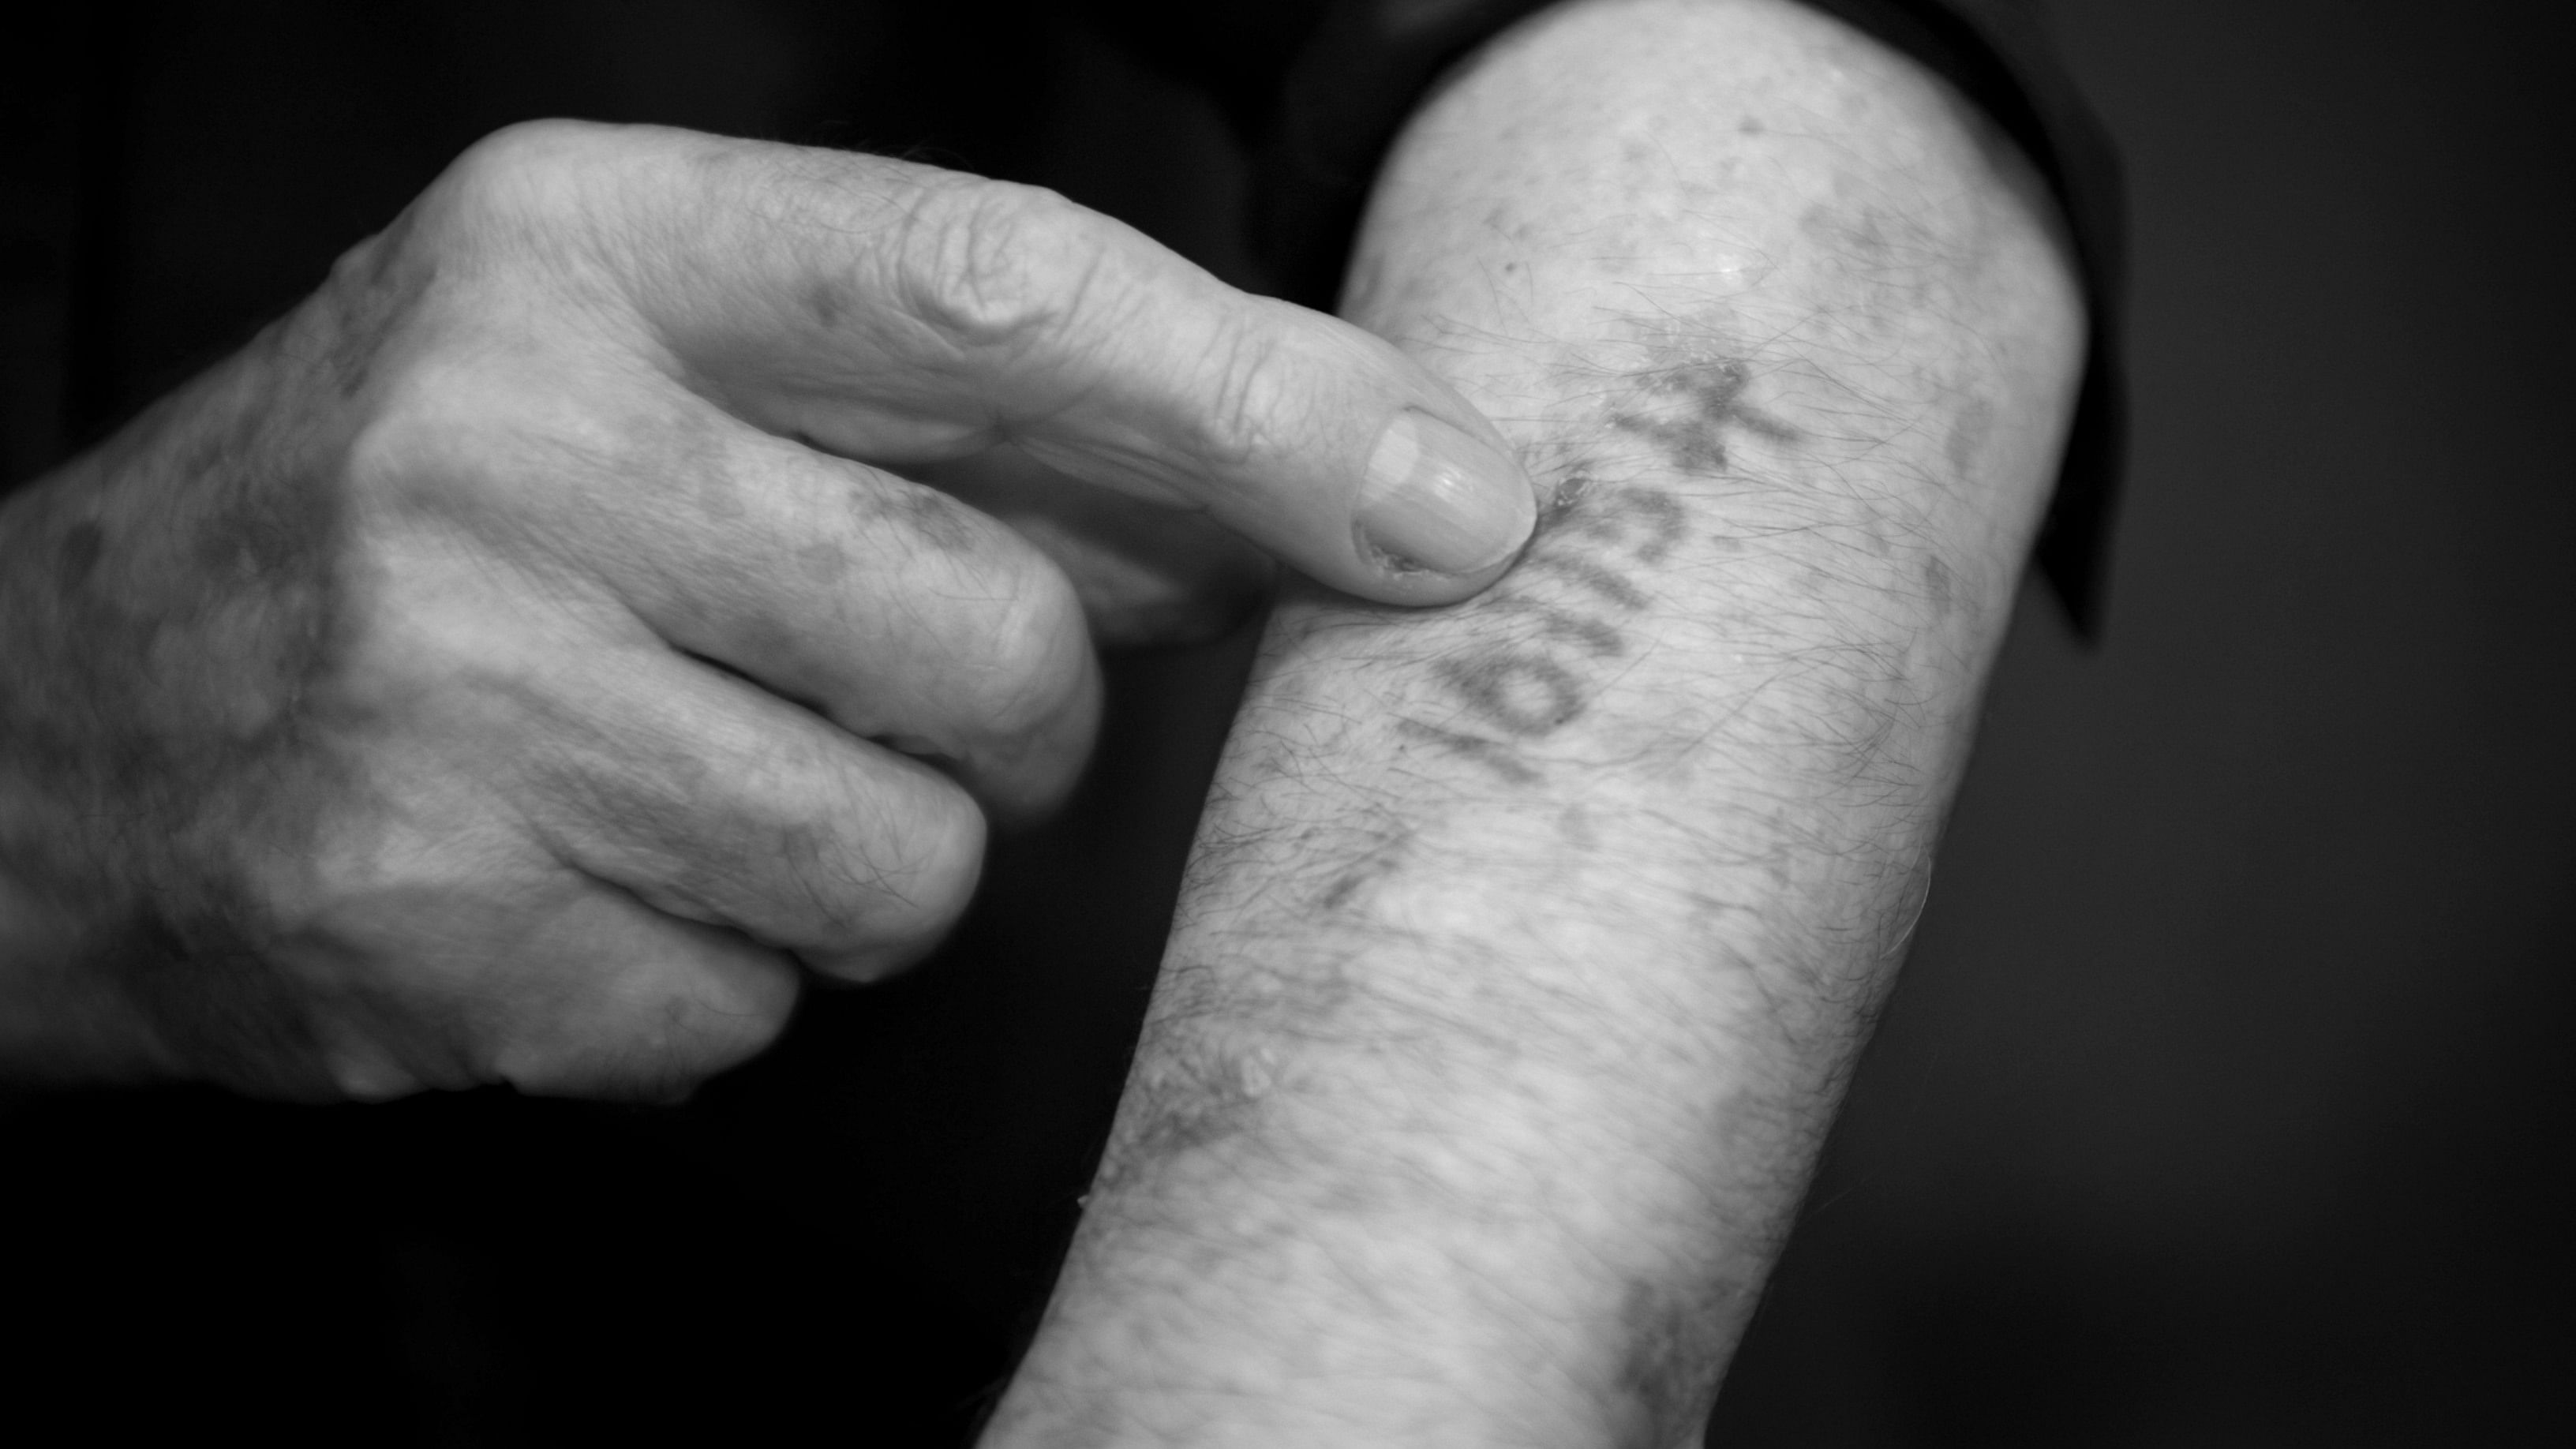 In the Holocaust, the Nazis would tattoo numbers on Jewish prisoners for identification. Credit: iStock Photo